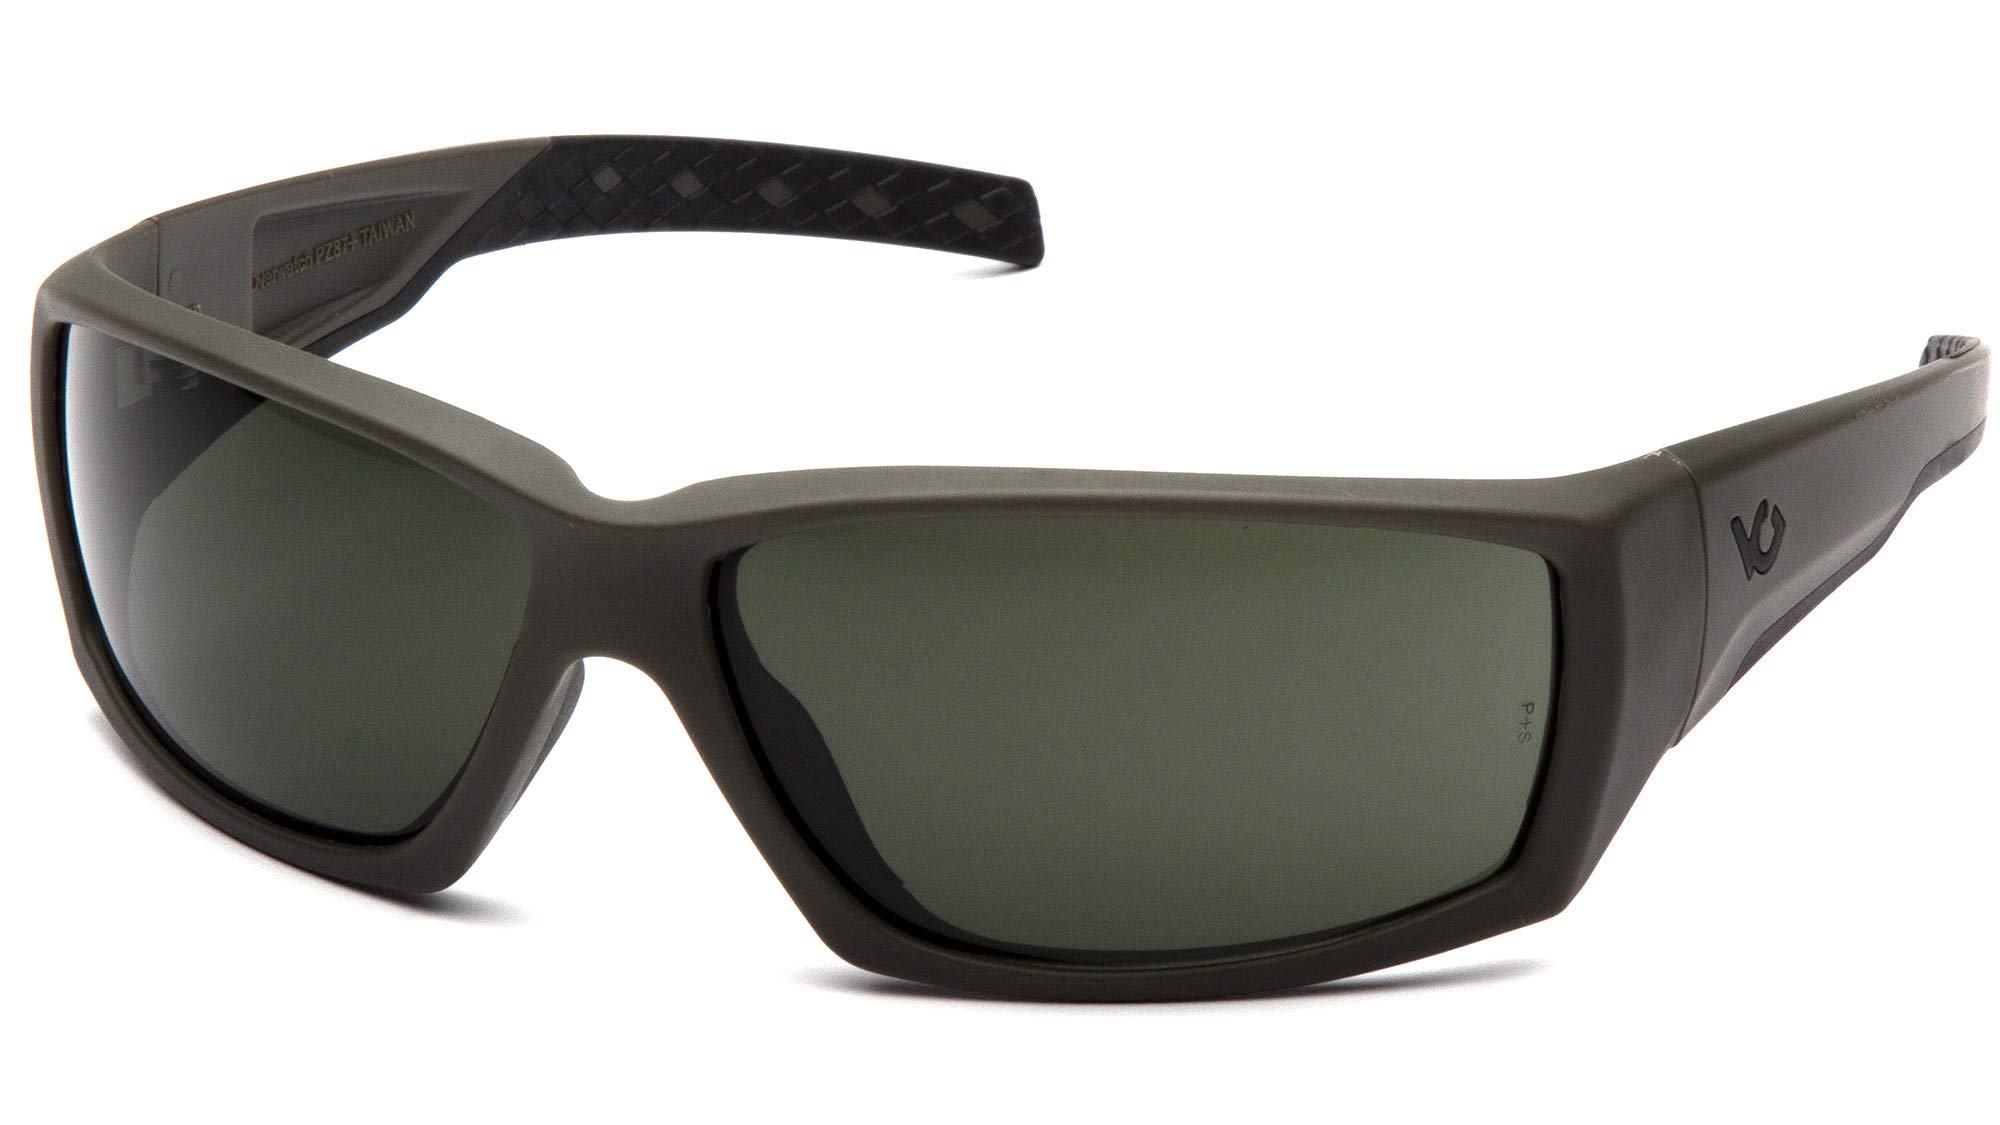 Venture Gear Overwatch Tactical Sunglasses with Anti-Fog Lens